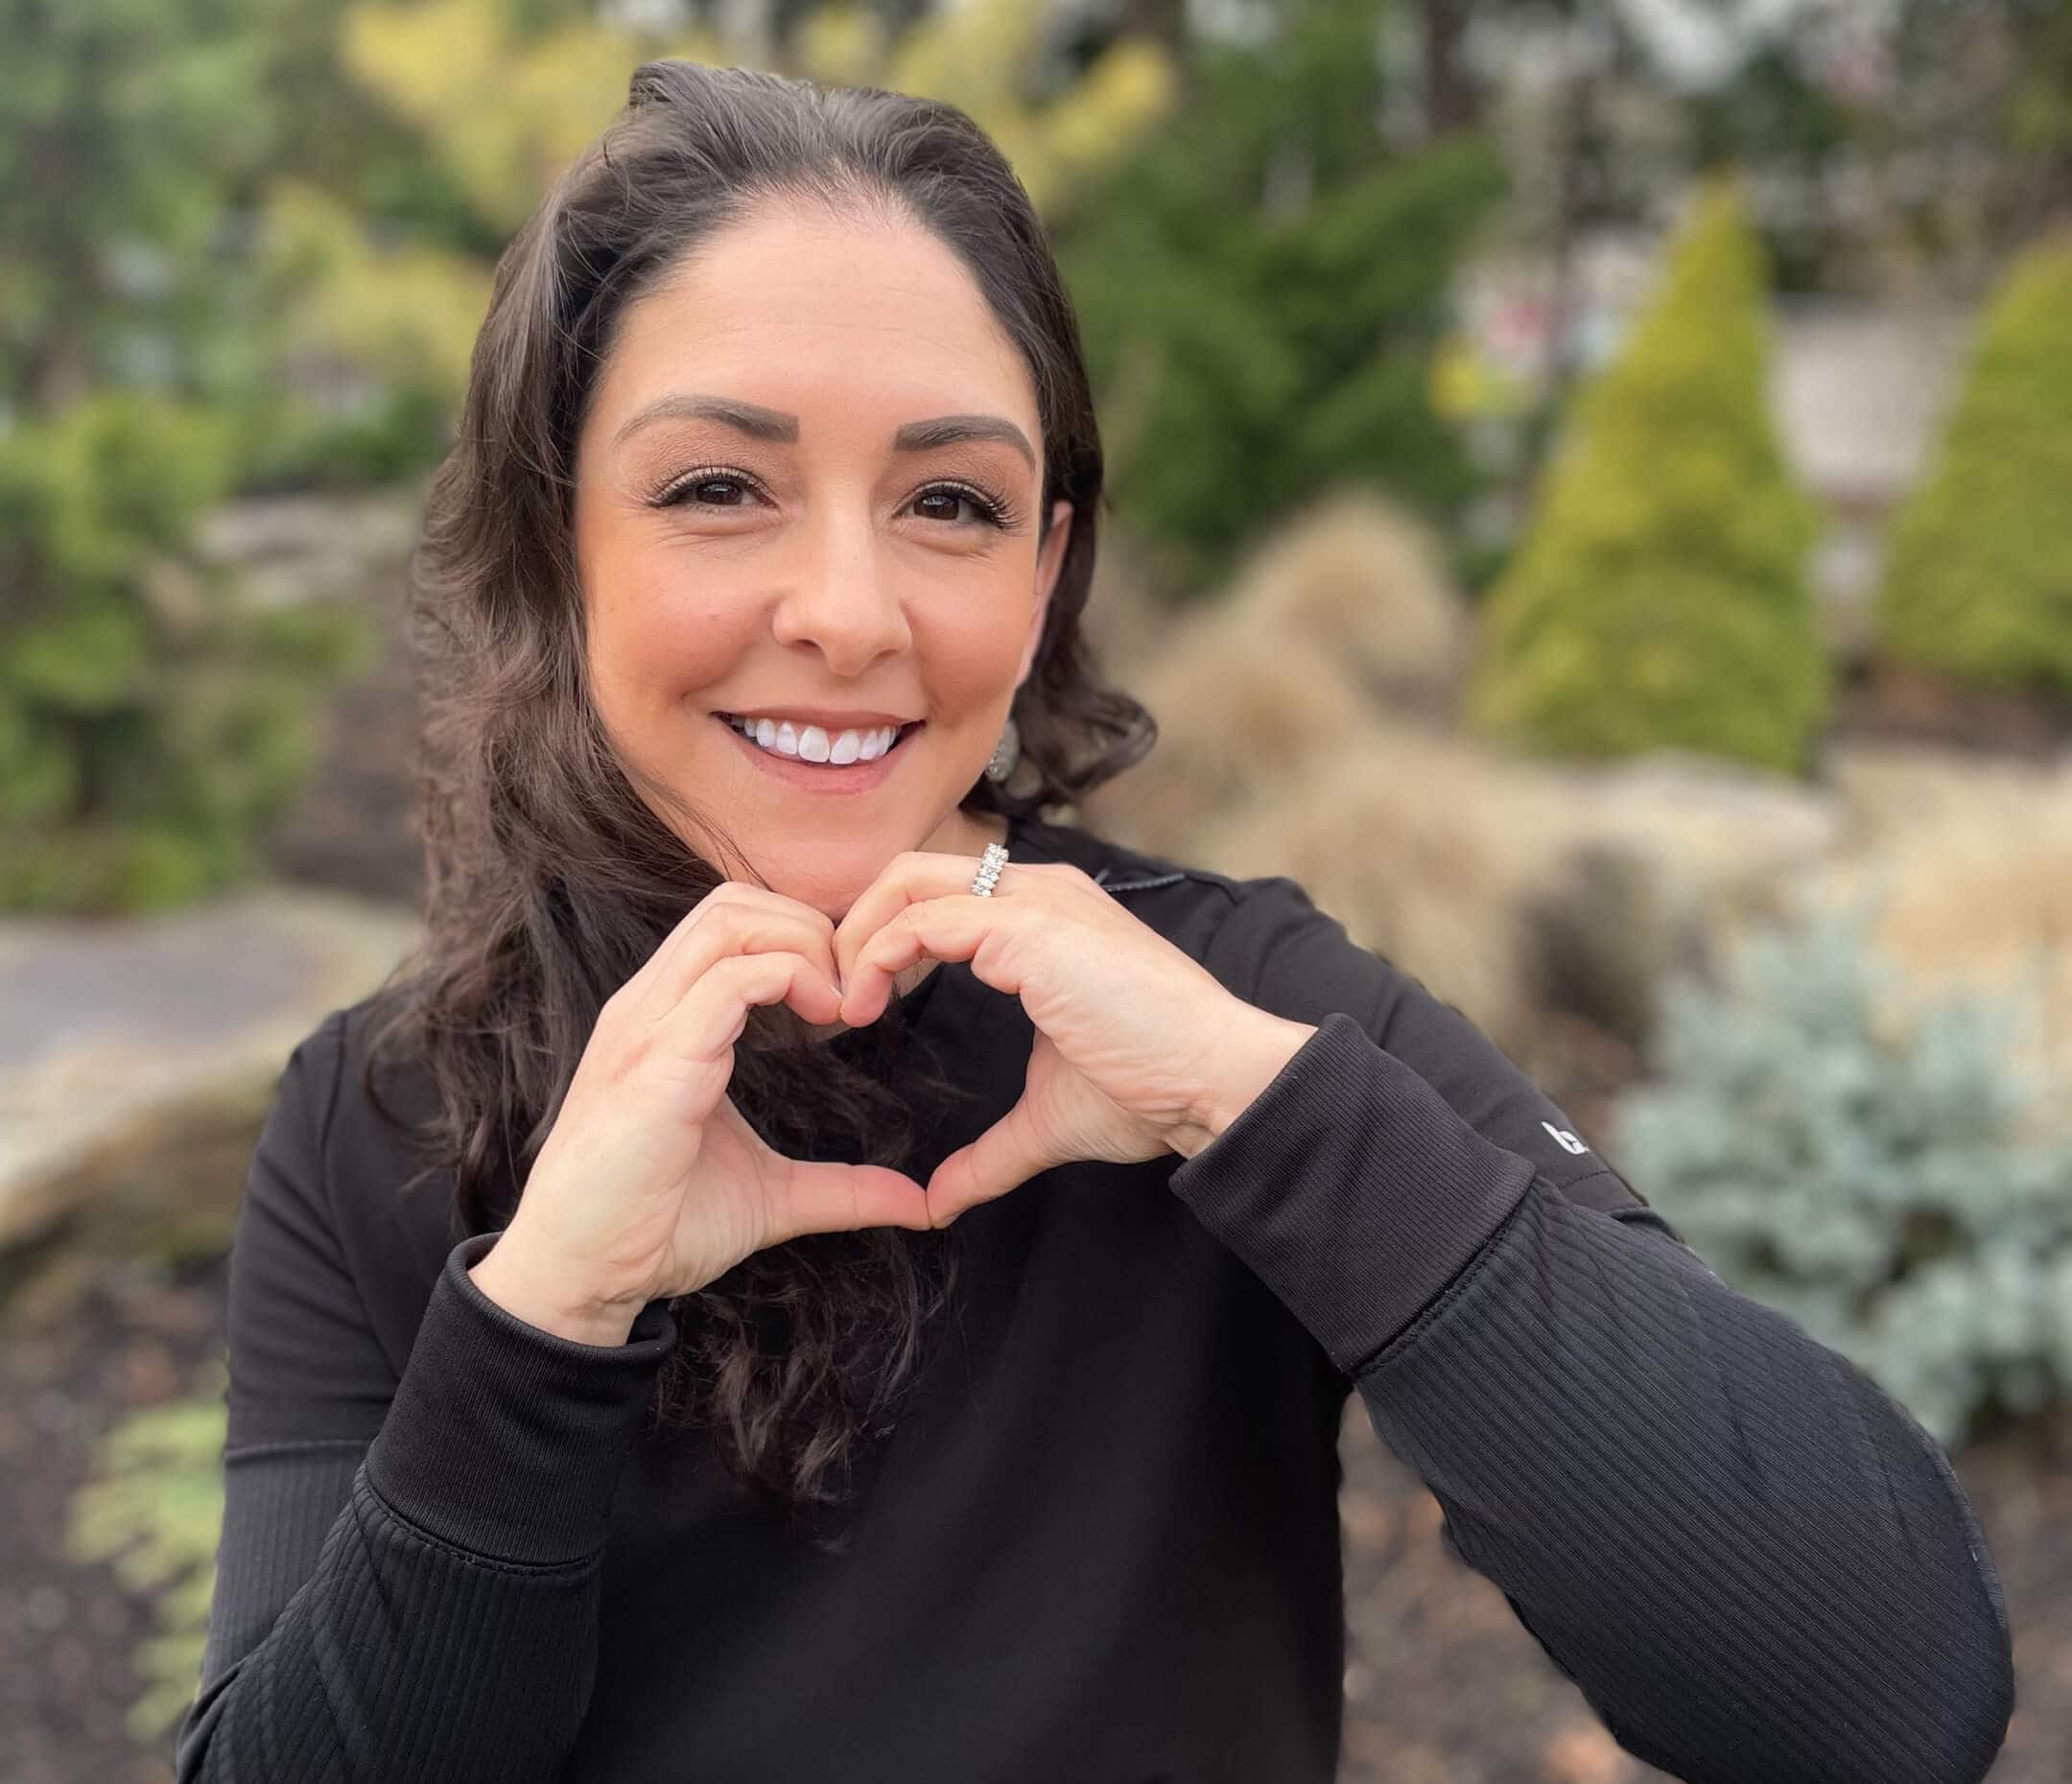 Team member posing with hands forming a heart